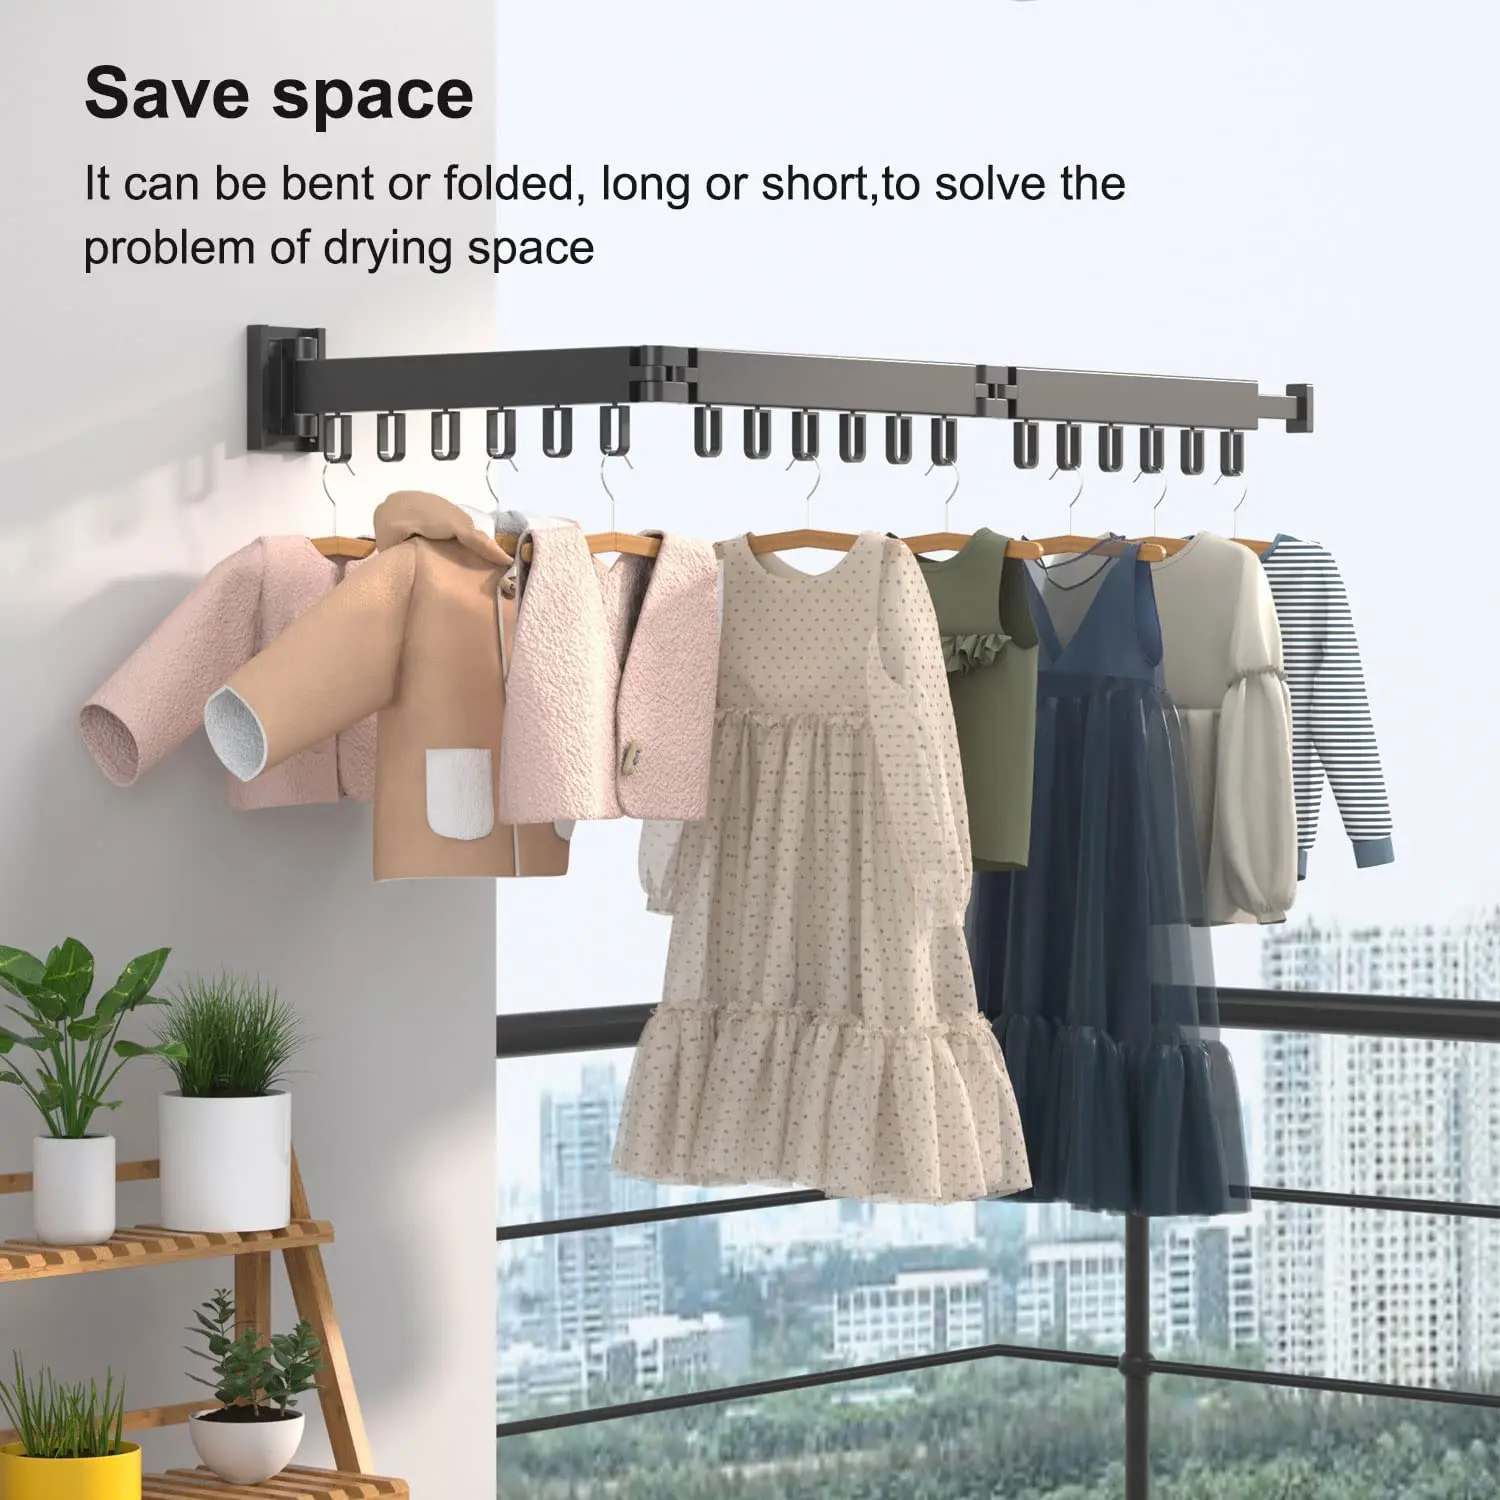 https://ae01.alicdn.com/kf/Sc4e8478135f44851ba870f76f5543f5fu/Retractable-Cloth-Drying-Rack-Folding-Clothes-Hanger-Wall-Mount-Indoor-Outdoor-Space-Saving-Aluminum-Home-Laundry.jpg